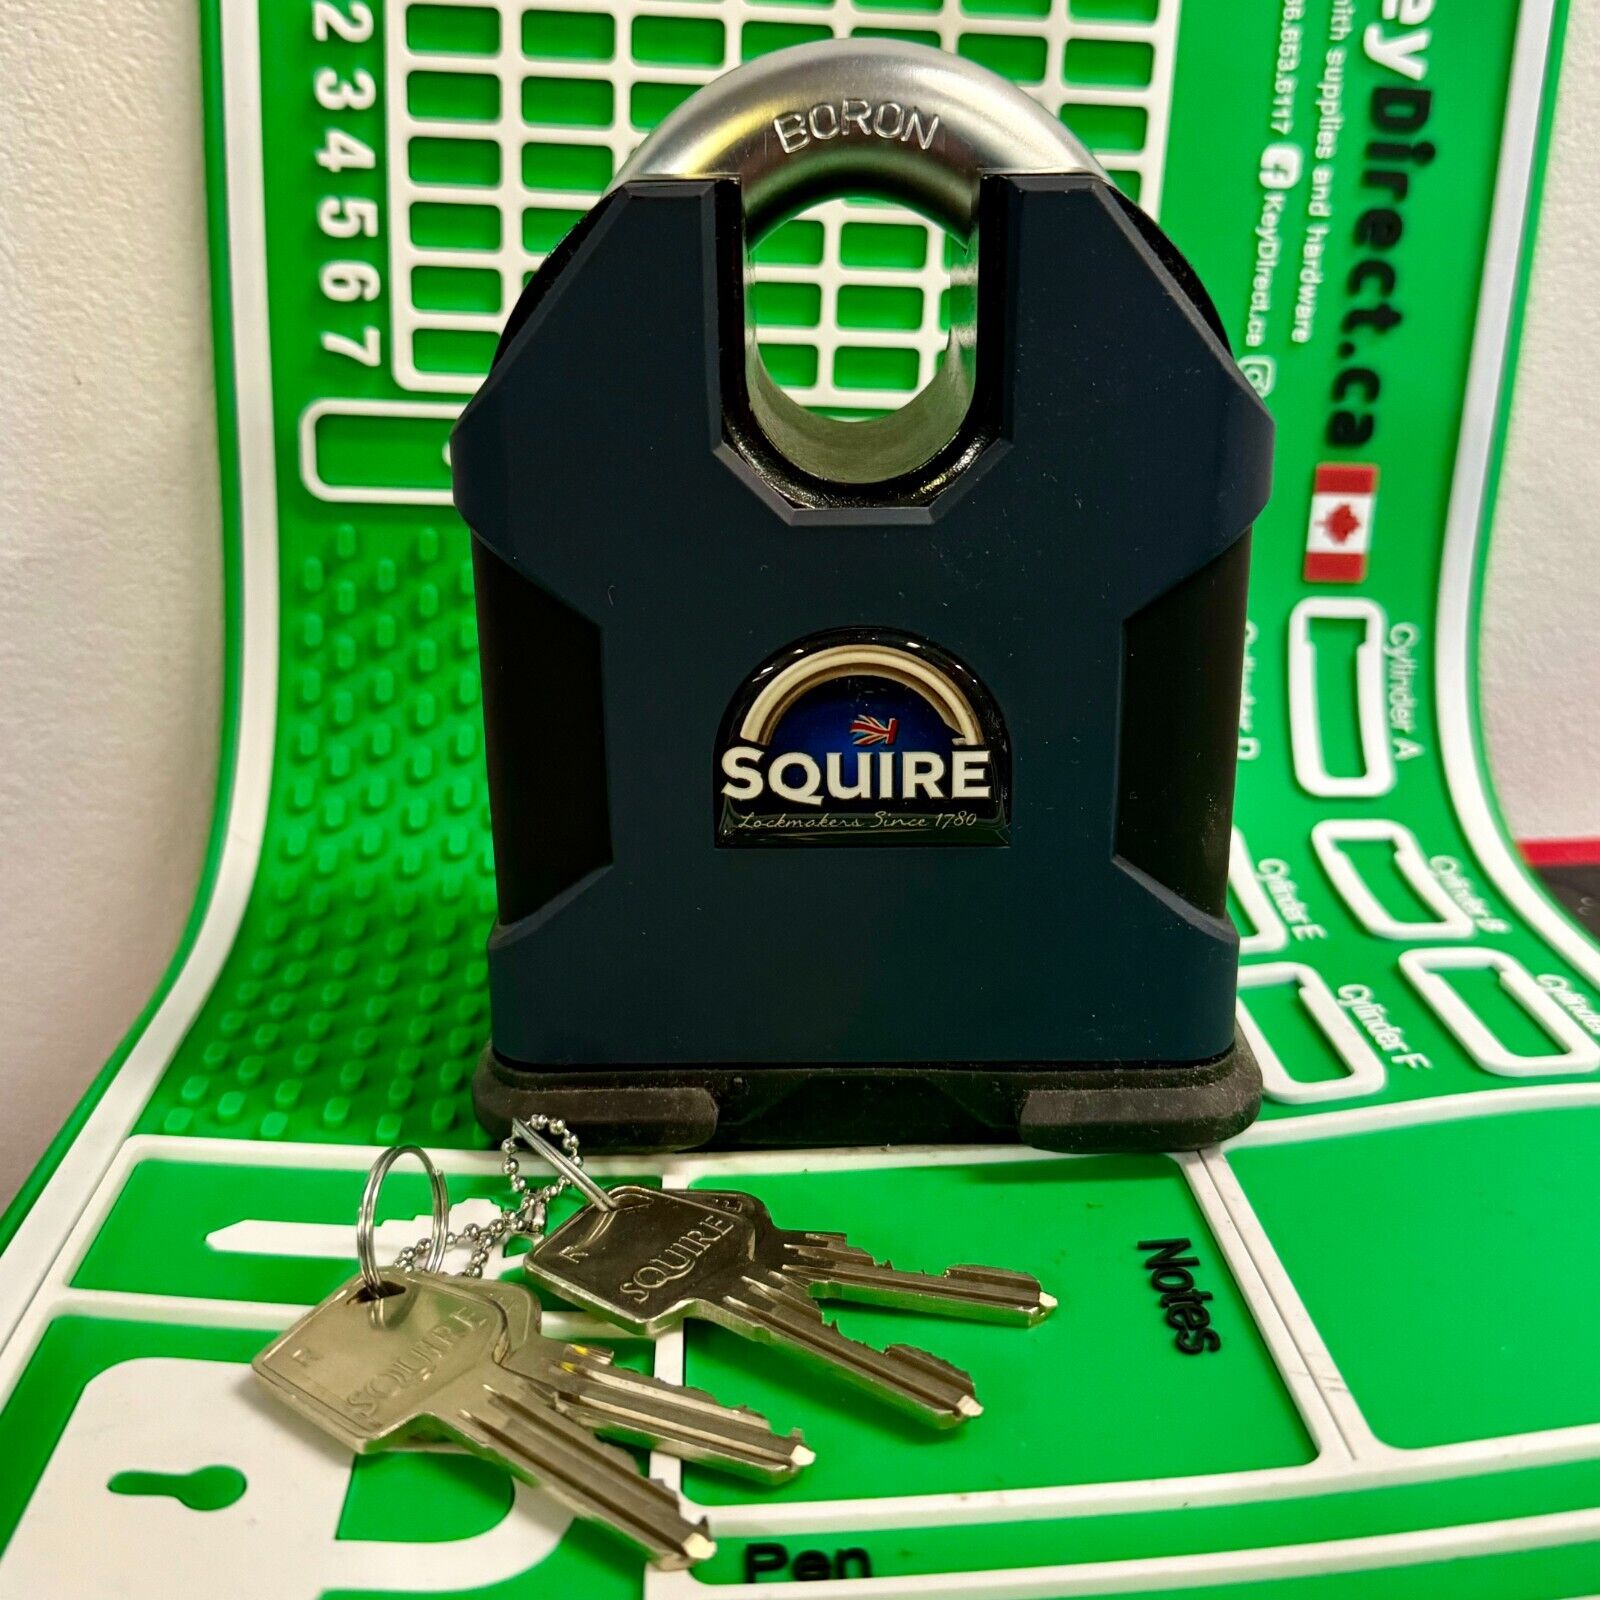 Squire SS100CS Stronghold CEN6 Closed Shackle High Security Padlock w/ 4 keys